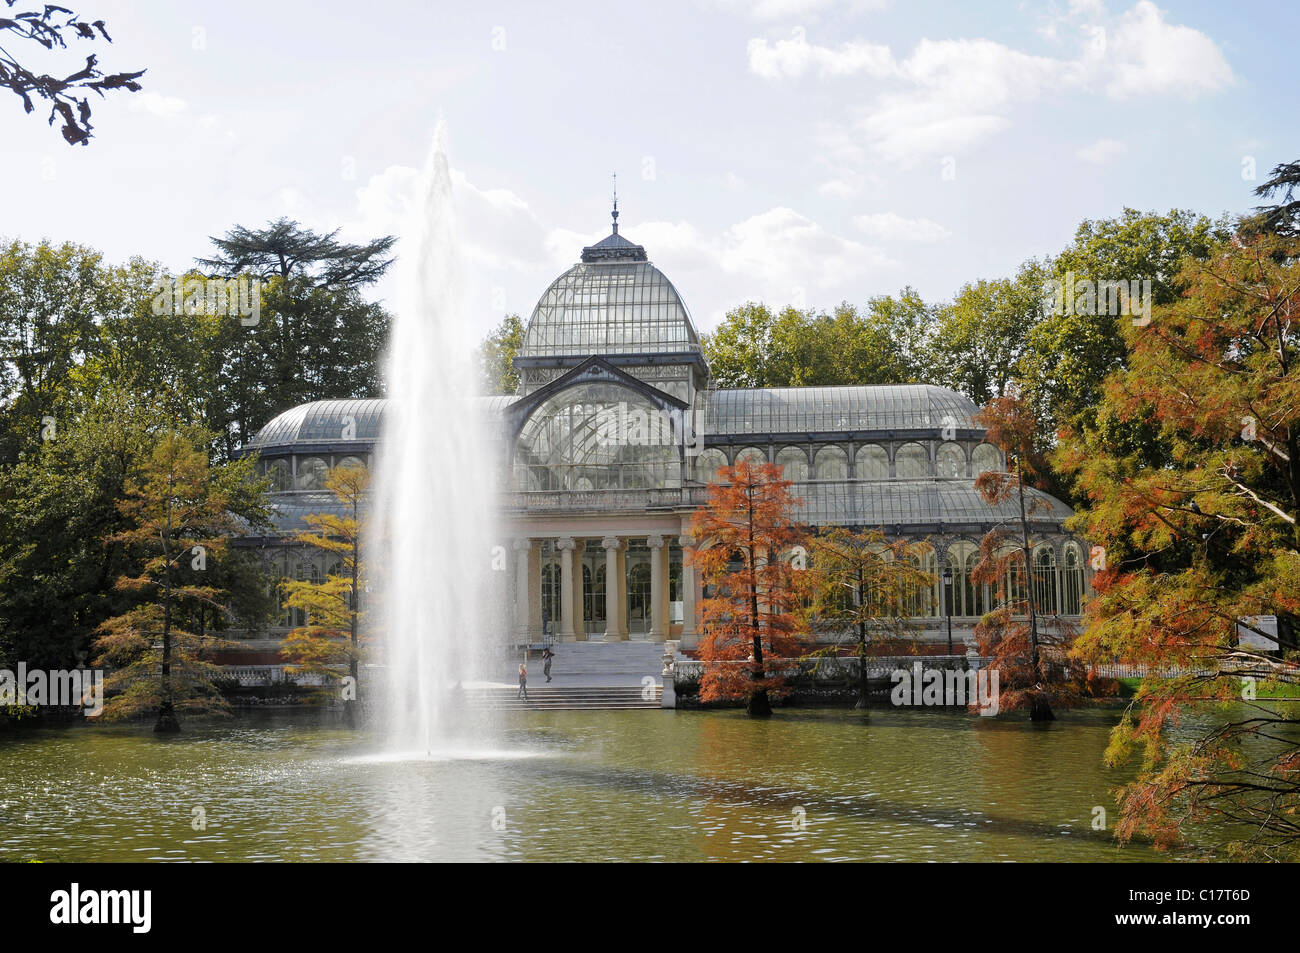 Fountain in a lake in front of a crystal palace, Palacio de Cristal, Retiro, Park, Madrid, Spain, Europe Stock Photo